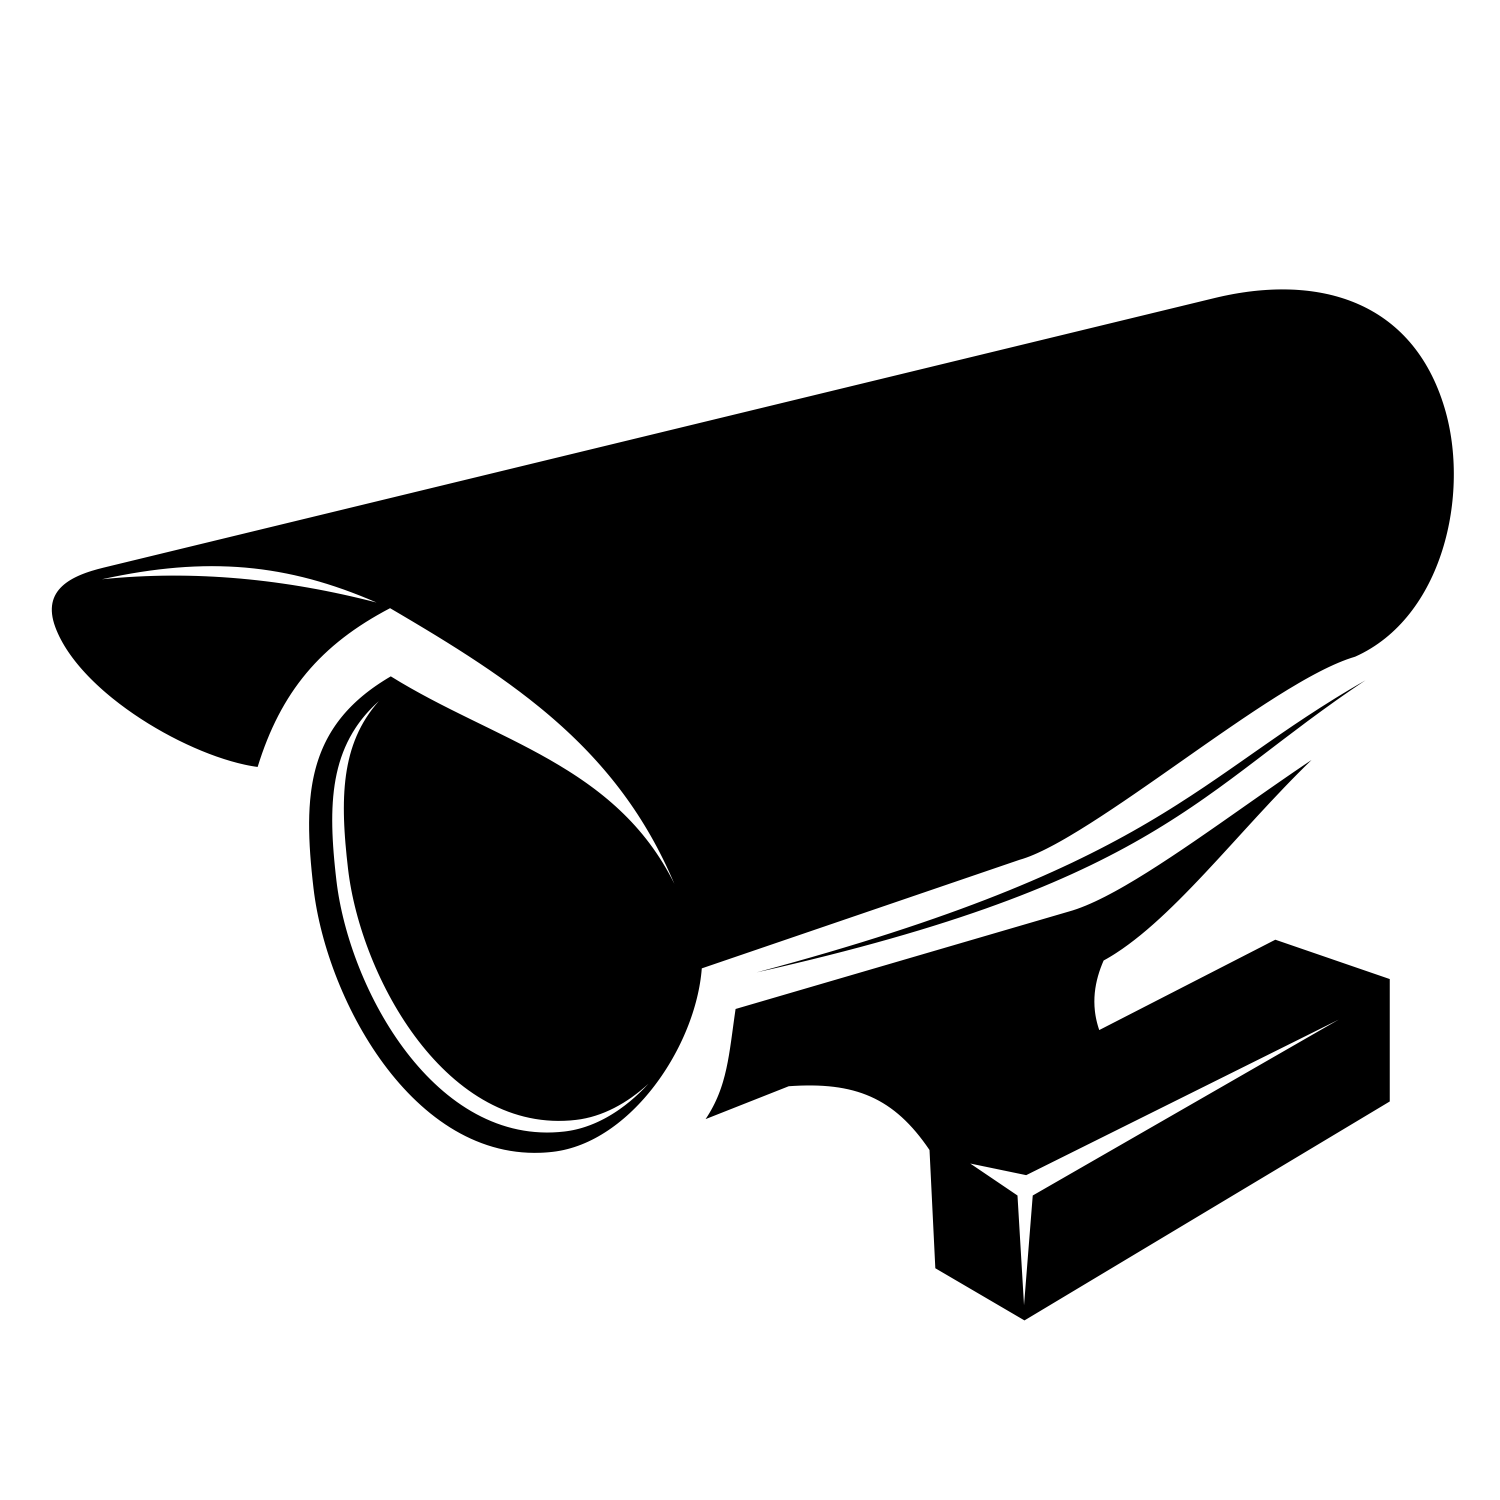 Security Camera Icon Related Keywords & Suggestions - Security ...